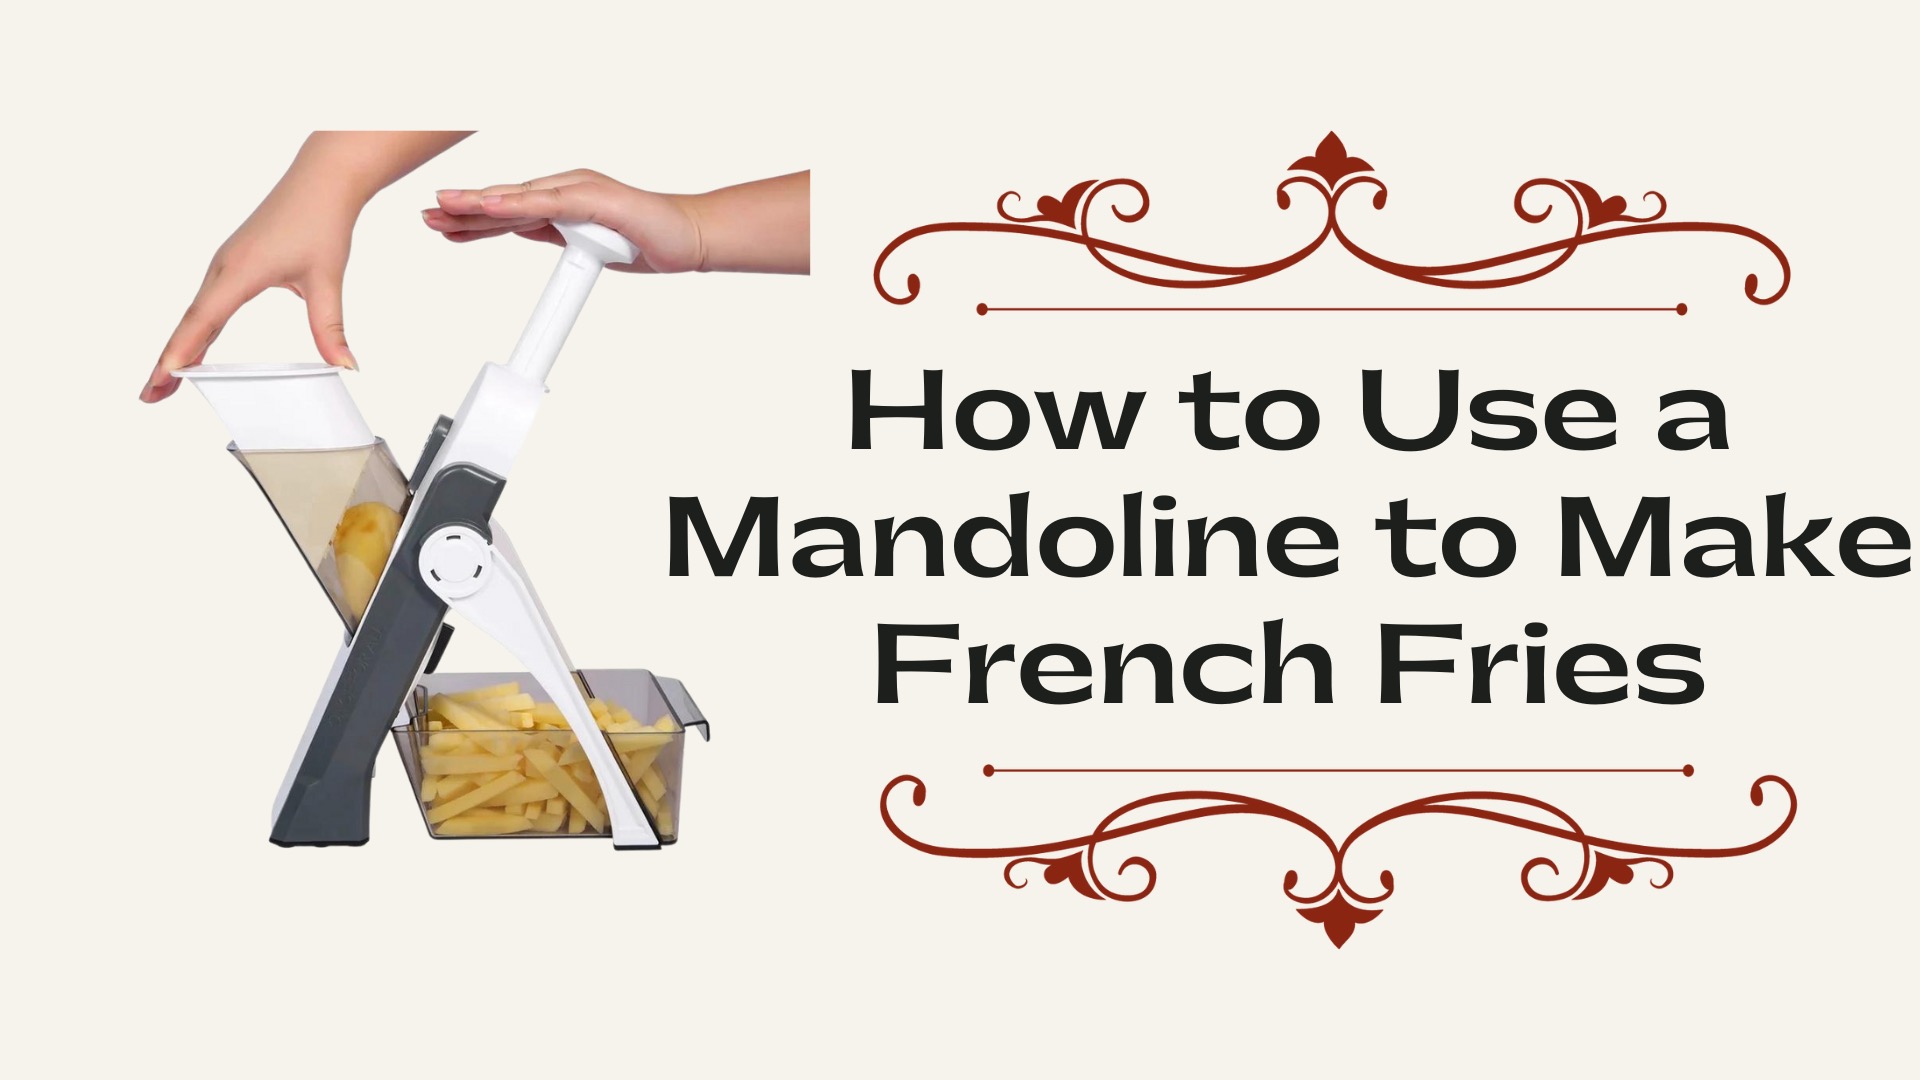 How to Use a Mandoline to Make French Fries